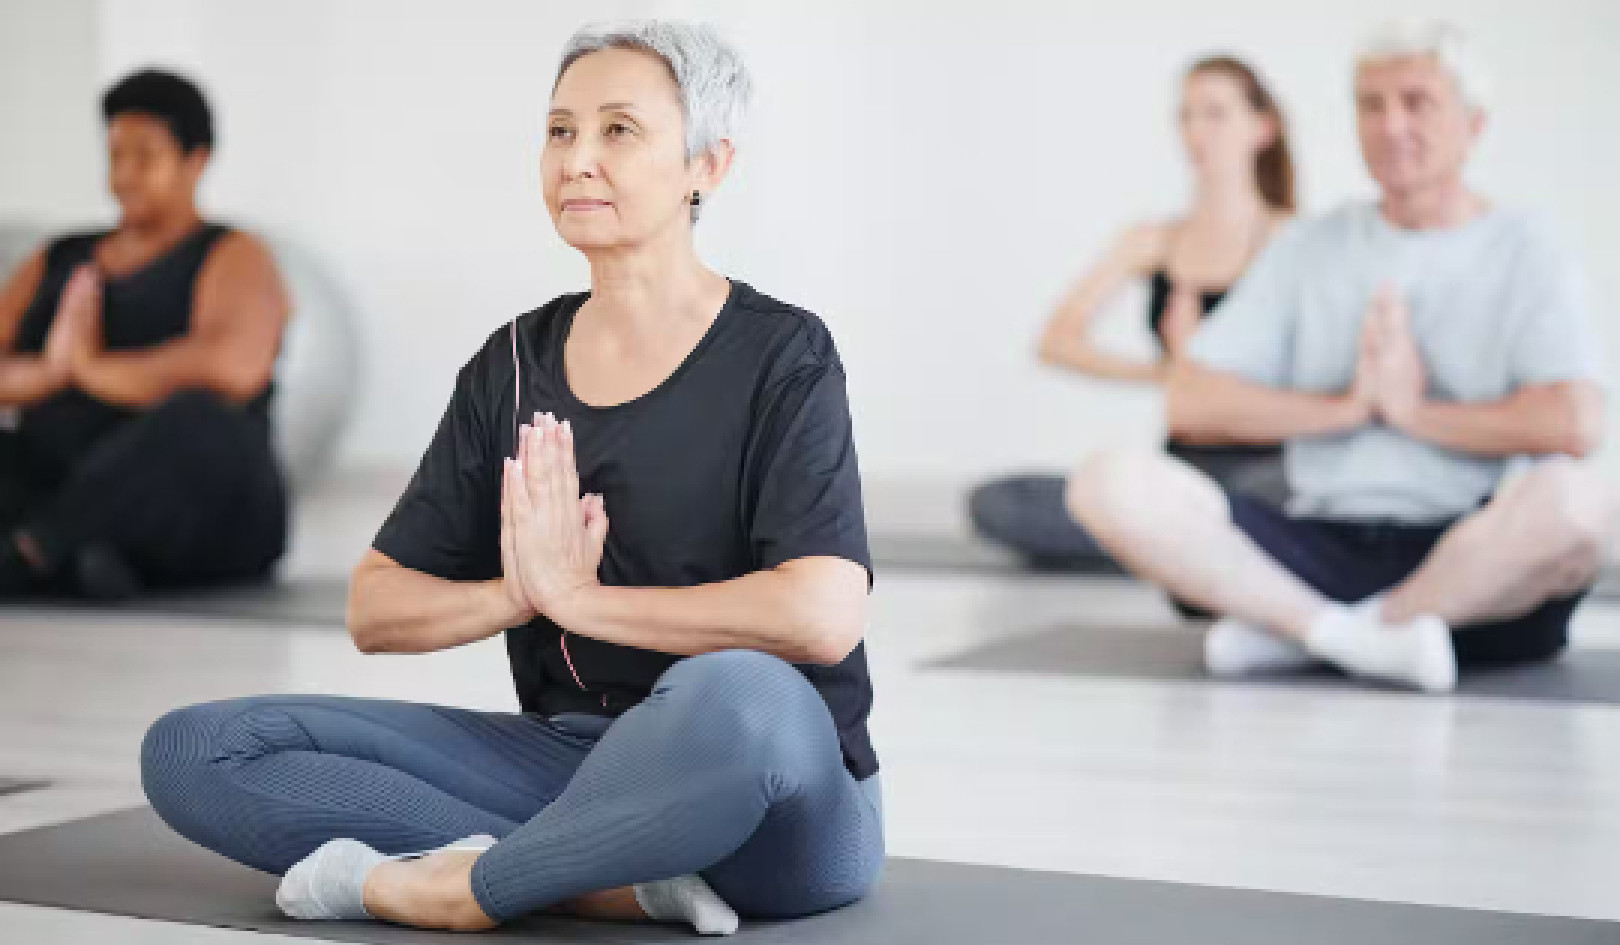 The Benefits of the Ancient Practice Yoga to Both Body and Mind